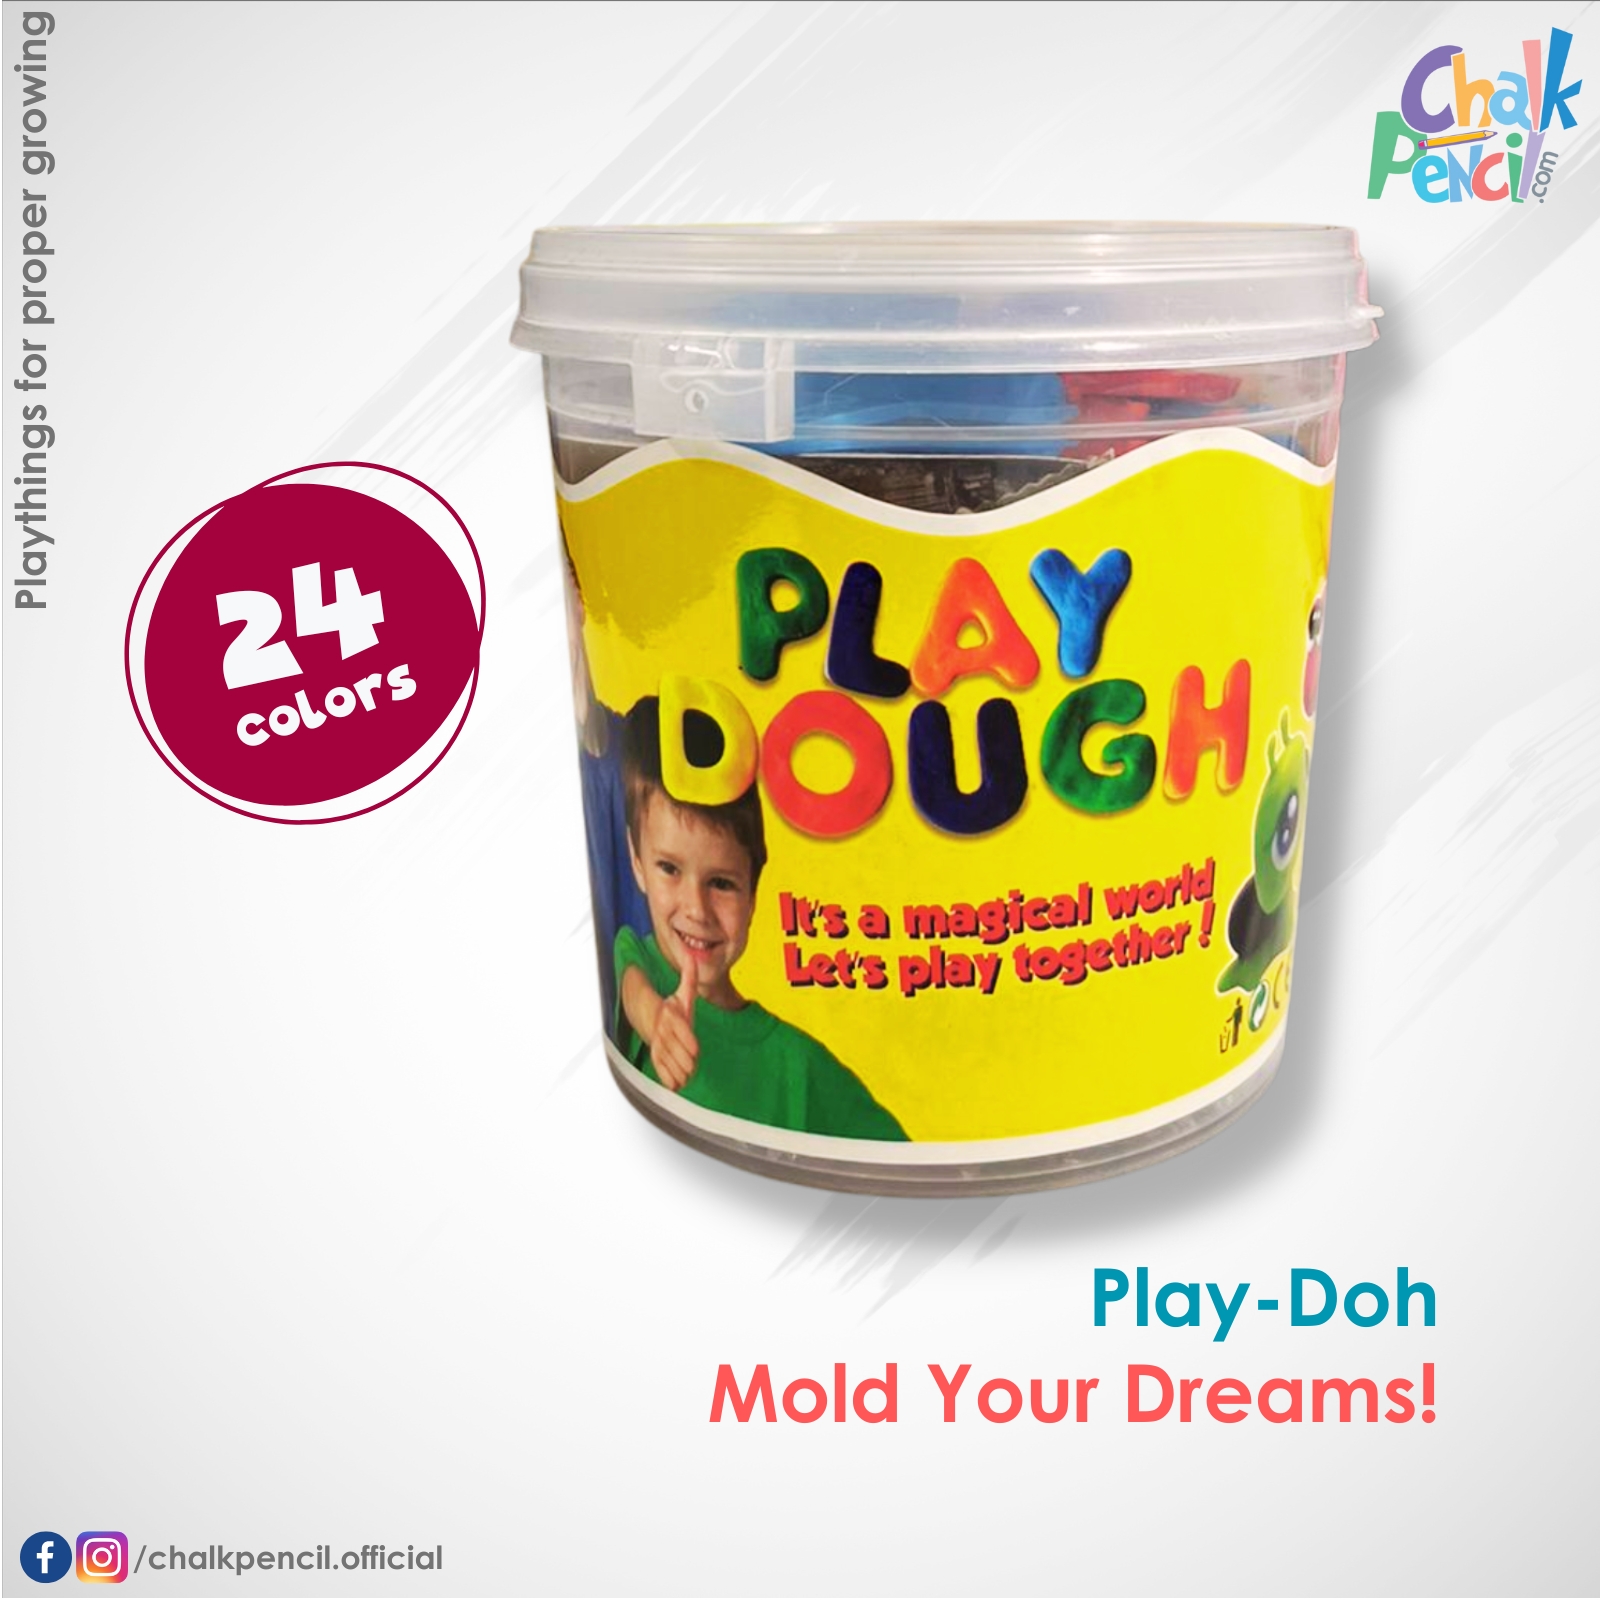 Play-Doh Exclusive Box